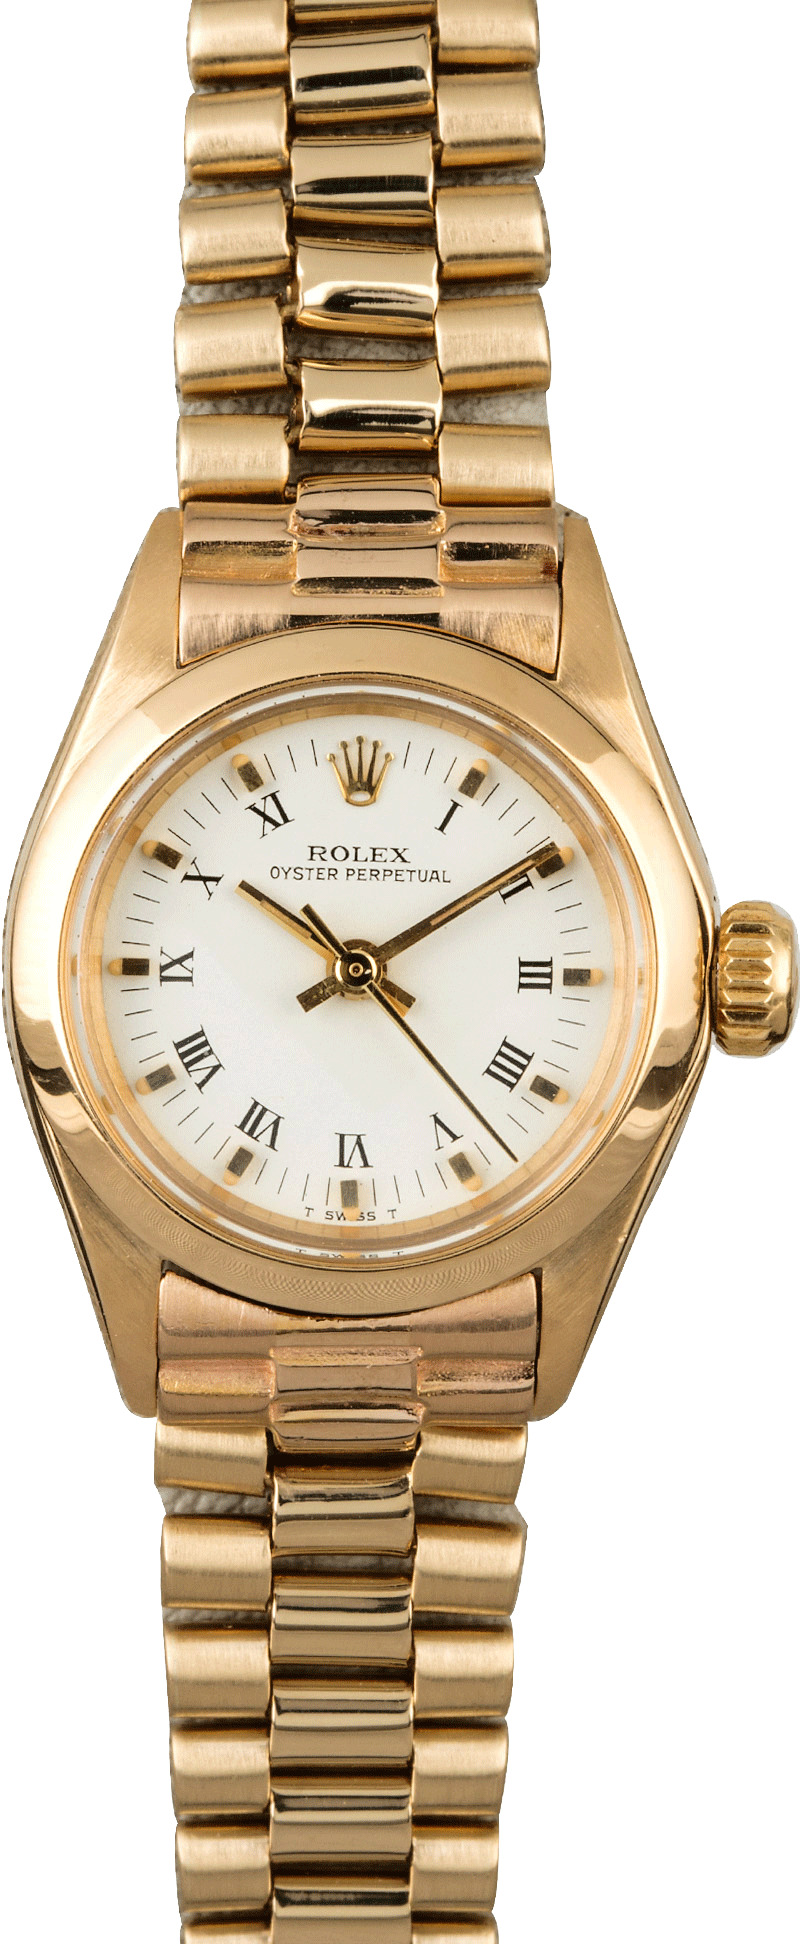 Rolex Oyster Perpetual 6718 President